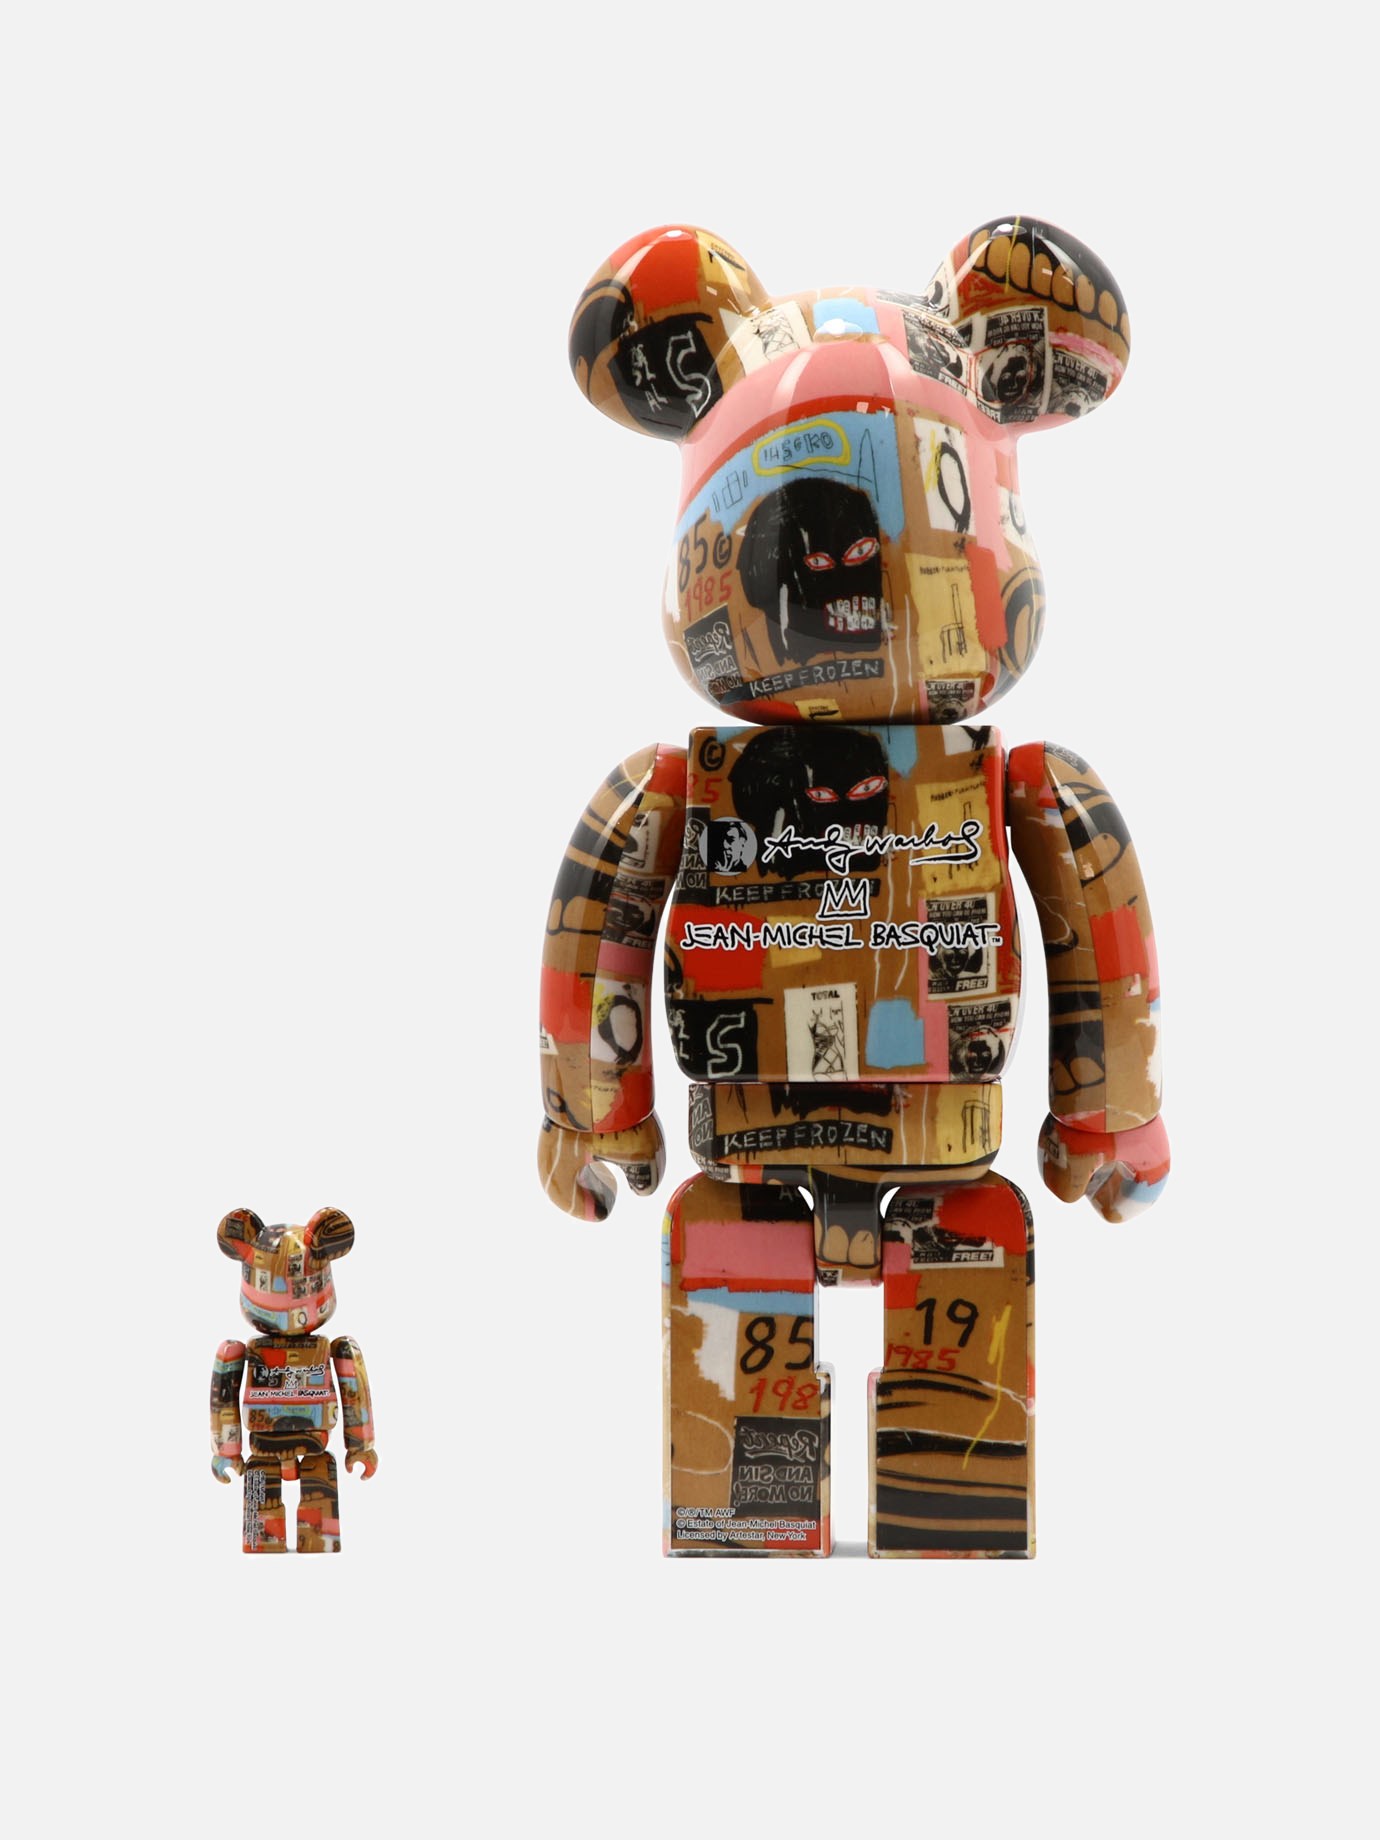  Be@rbrick Andy Warhol  100% and 400% toy by Medicom Toy